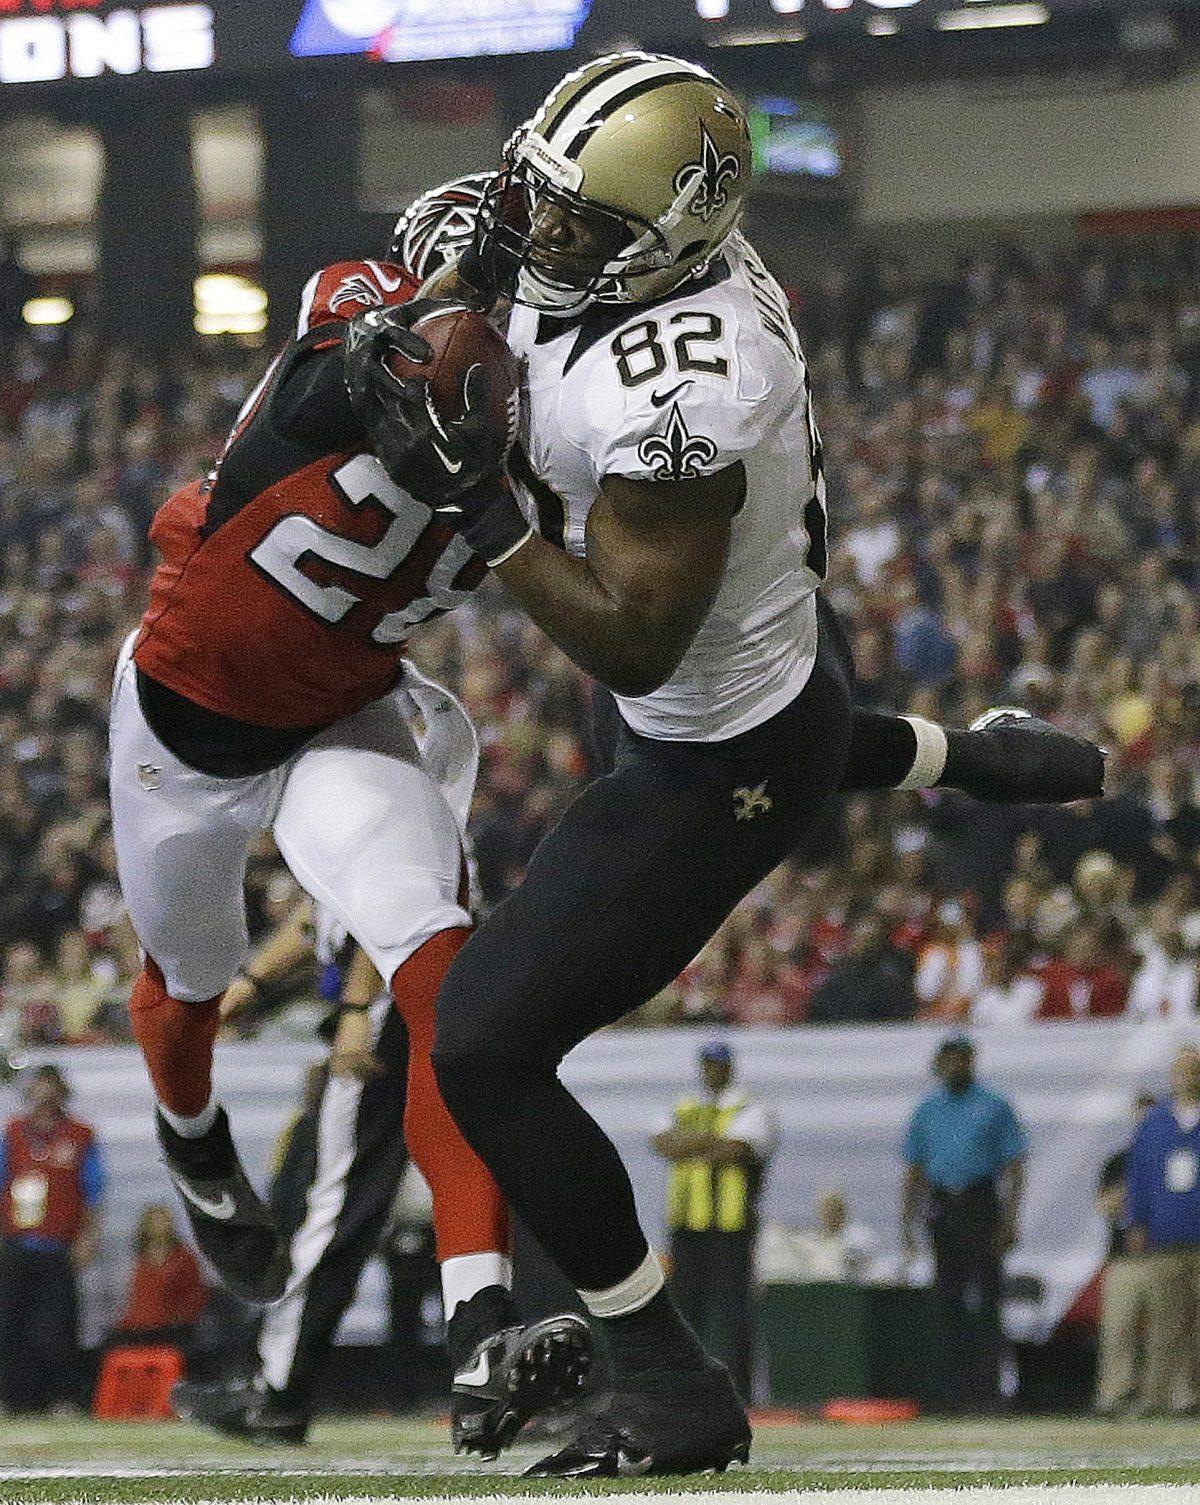 New Orleans Saints tight end Benjamin Watson (82) makes a touch-down catch against Atlanta Falcons free safety Thomas DeCoud (28) during the first half of an NFL football game, Thursday, Nov. 21, 2013, in Atlanta. (AP Photo/David Goldman)